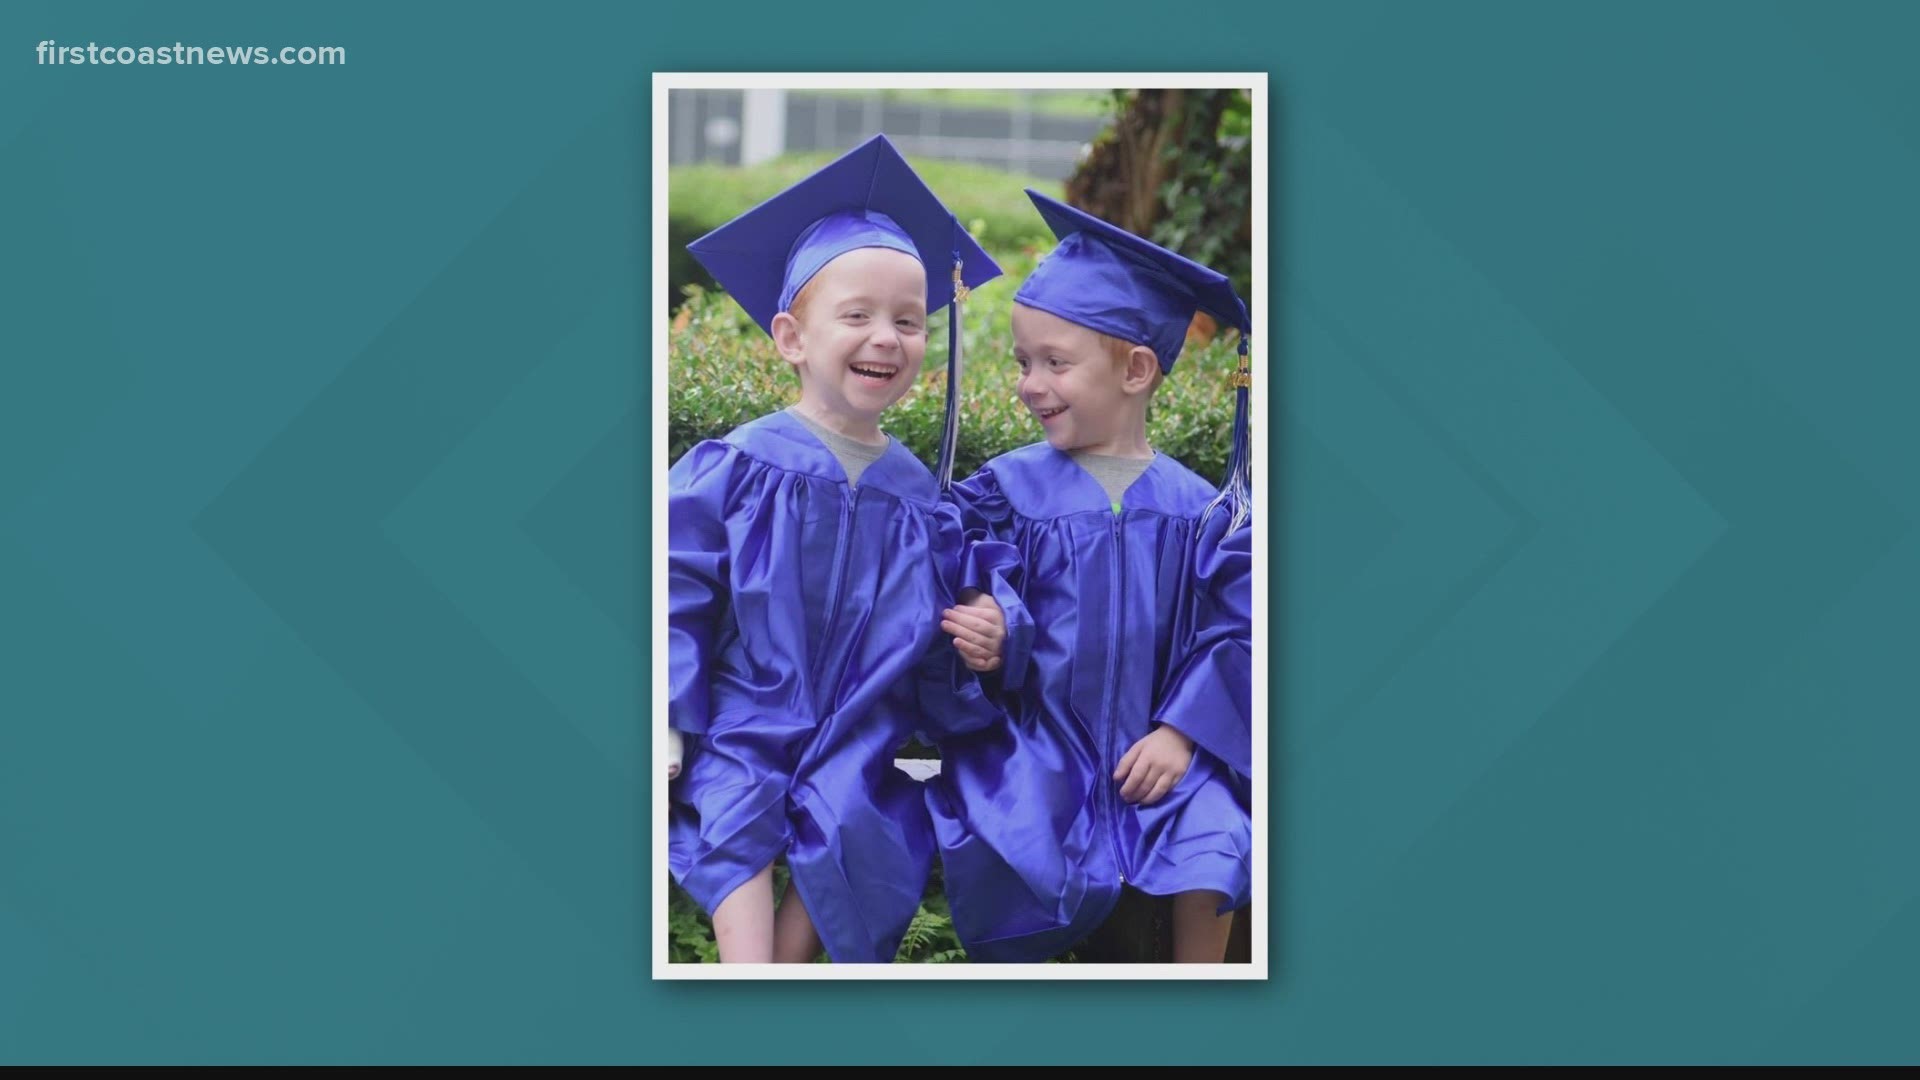 The twin boys captured the hearts of Jacksonville four years ago, and they're taking the next step on their lifelong journey: graduating pre-K.